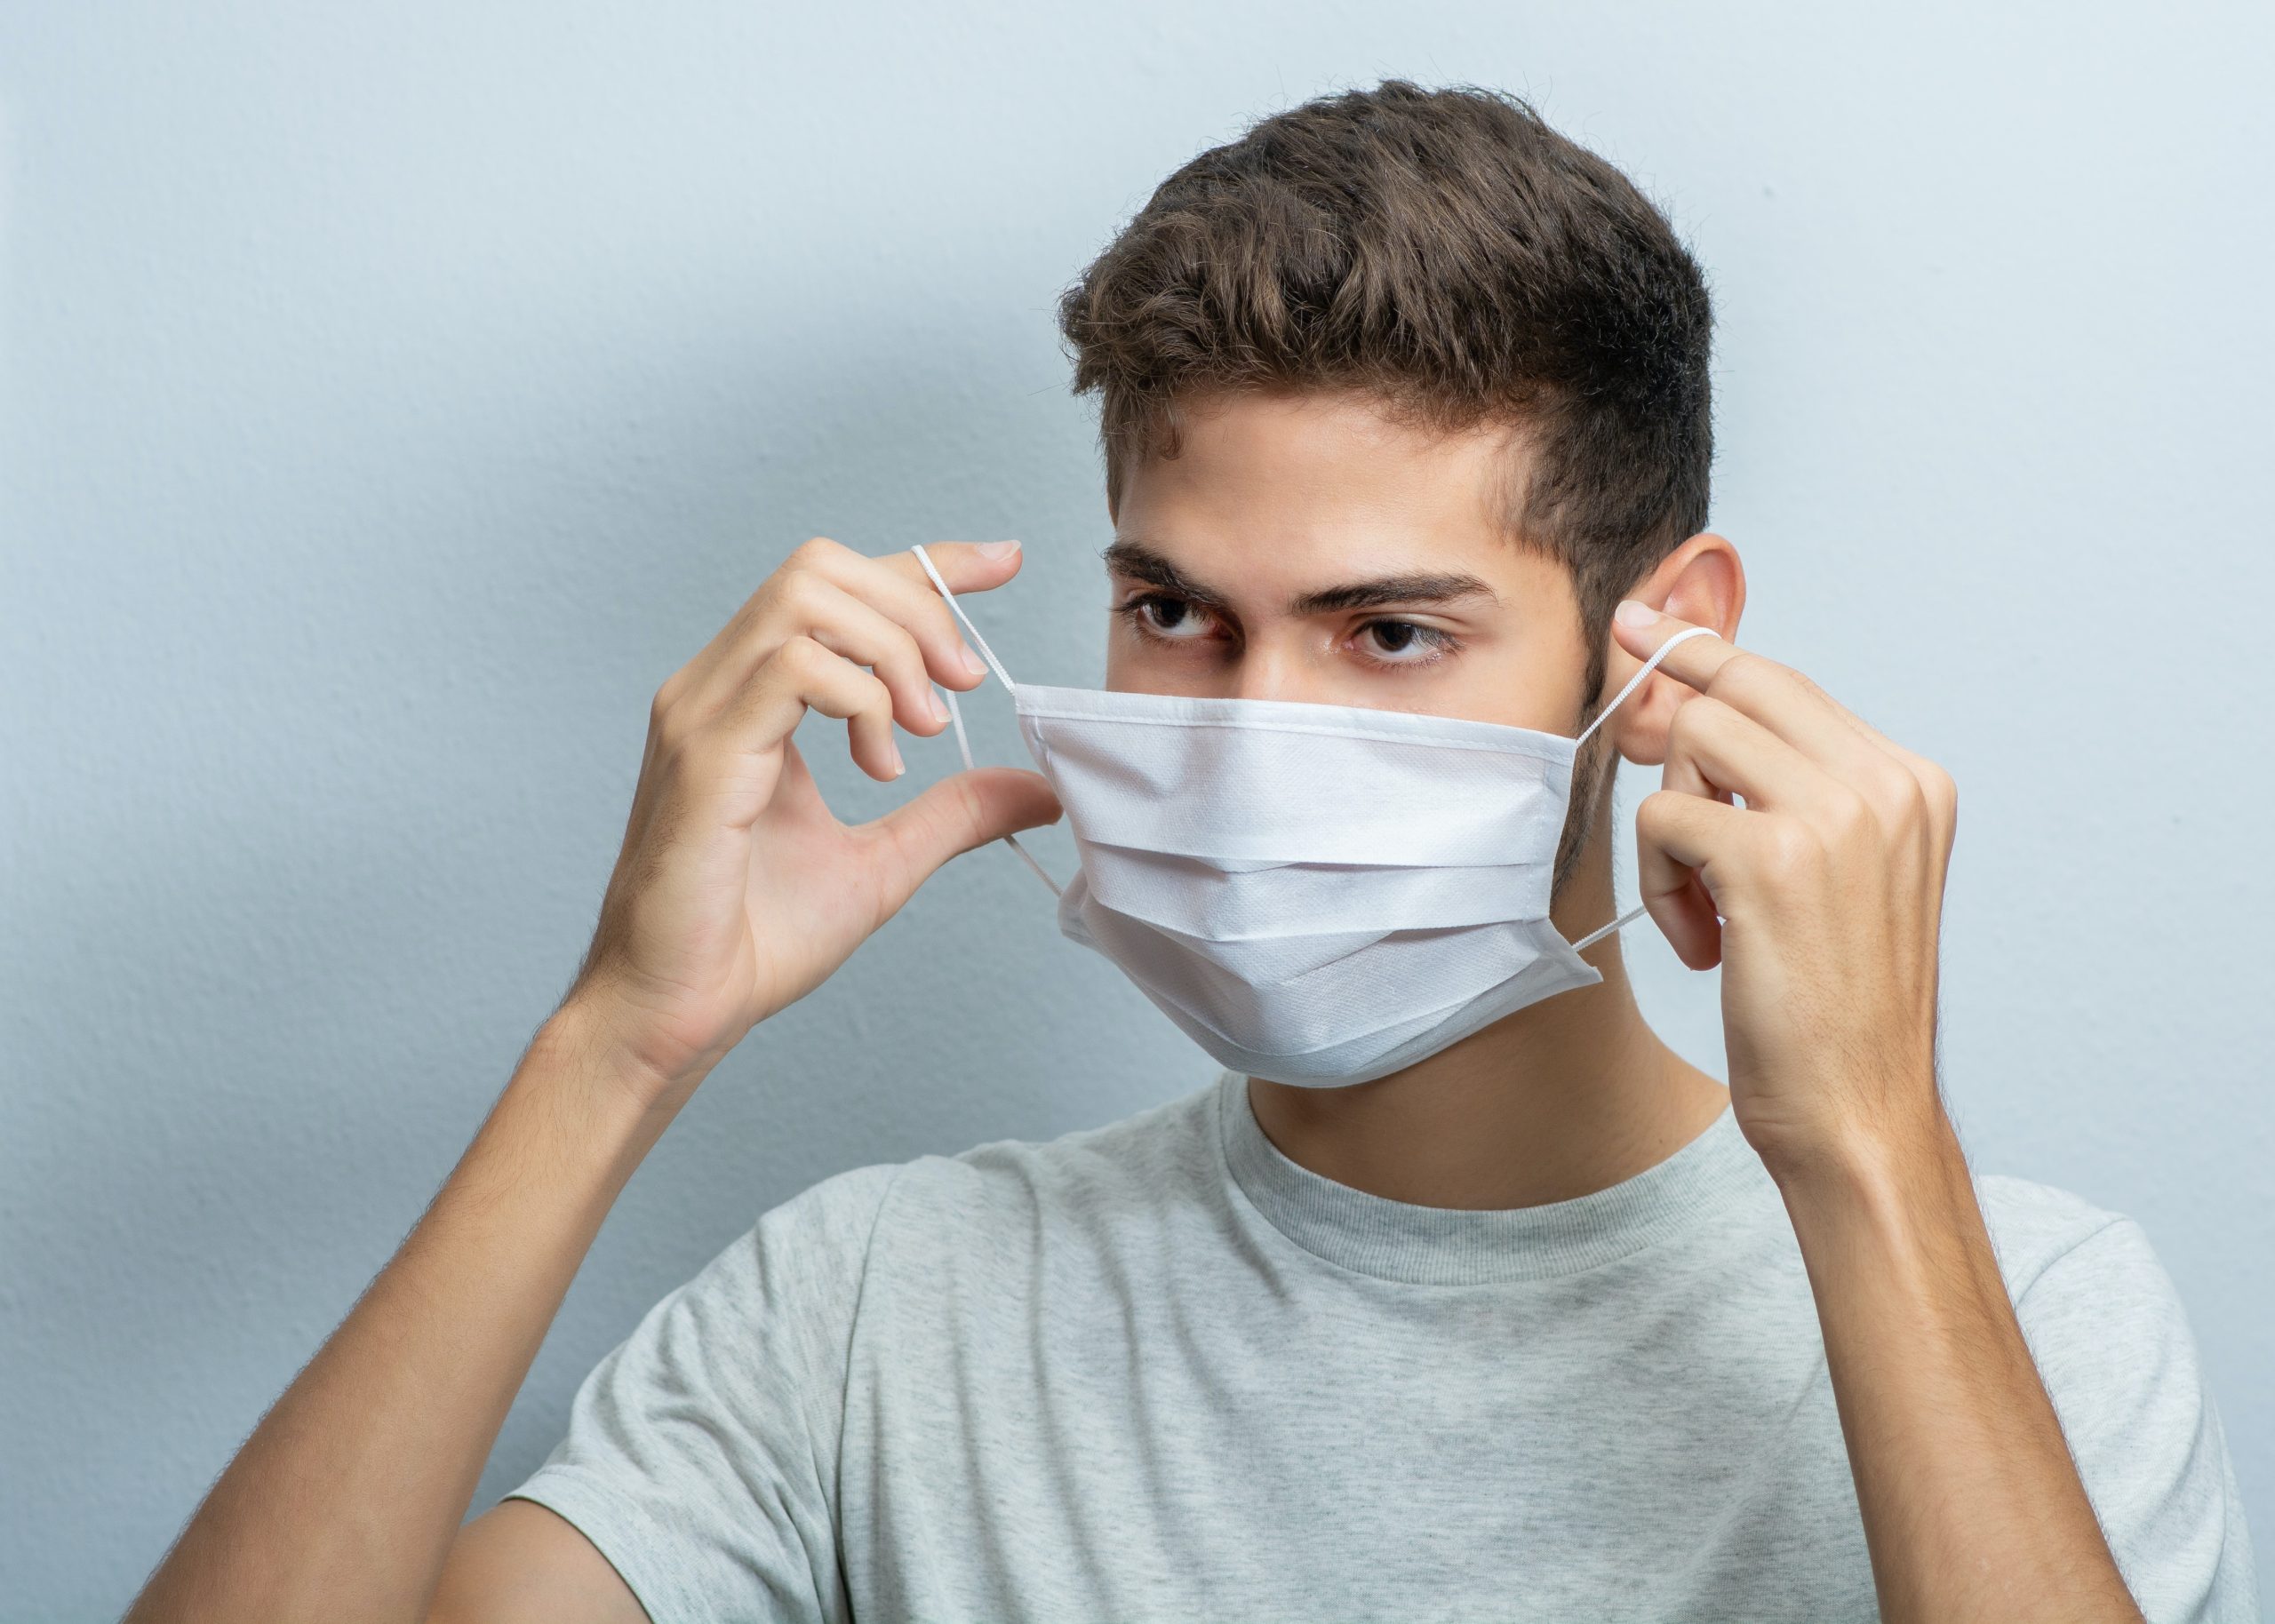 NEWS | GP Surgery in Herefordshire asks all patients to wear face masks as COVID-19 cases rise in the county